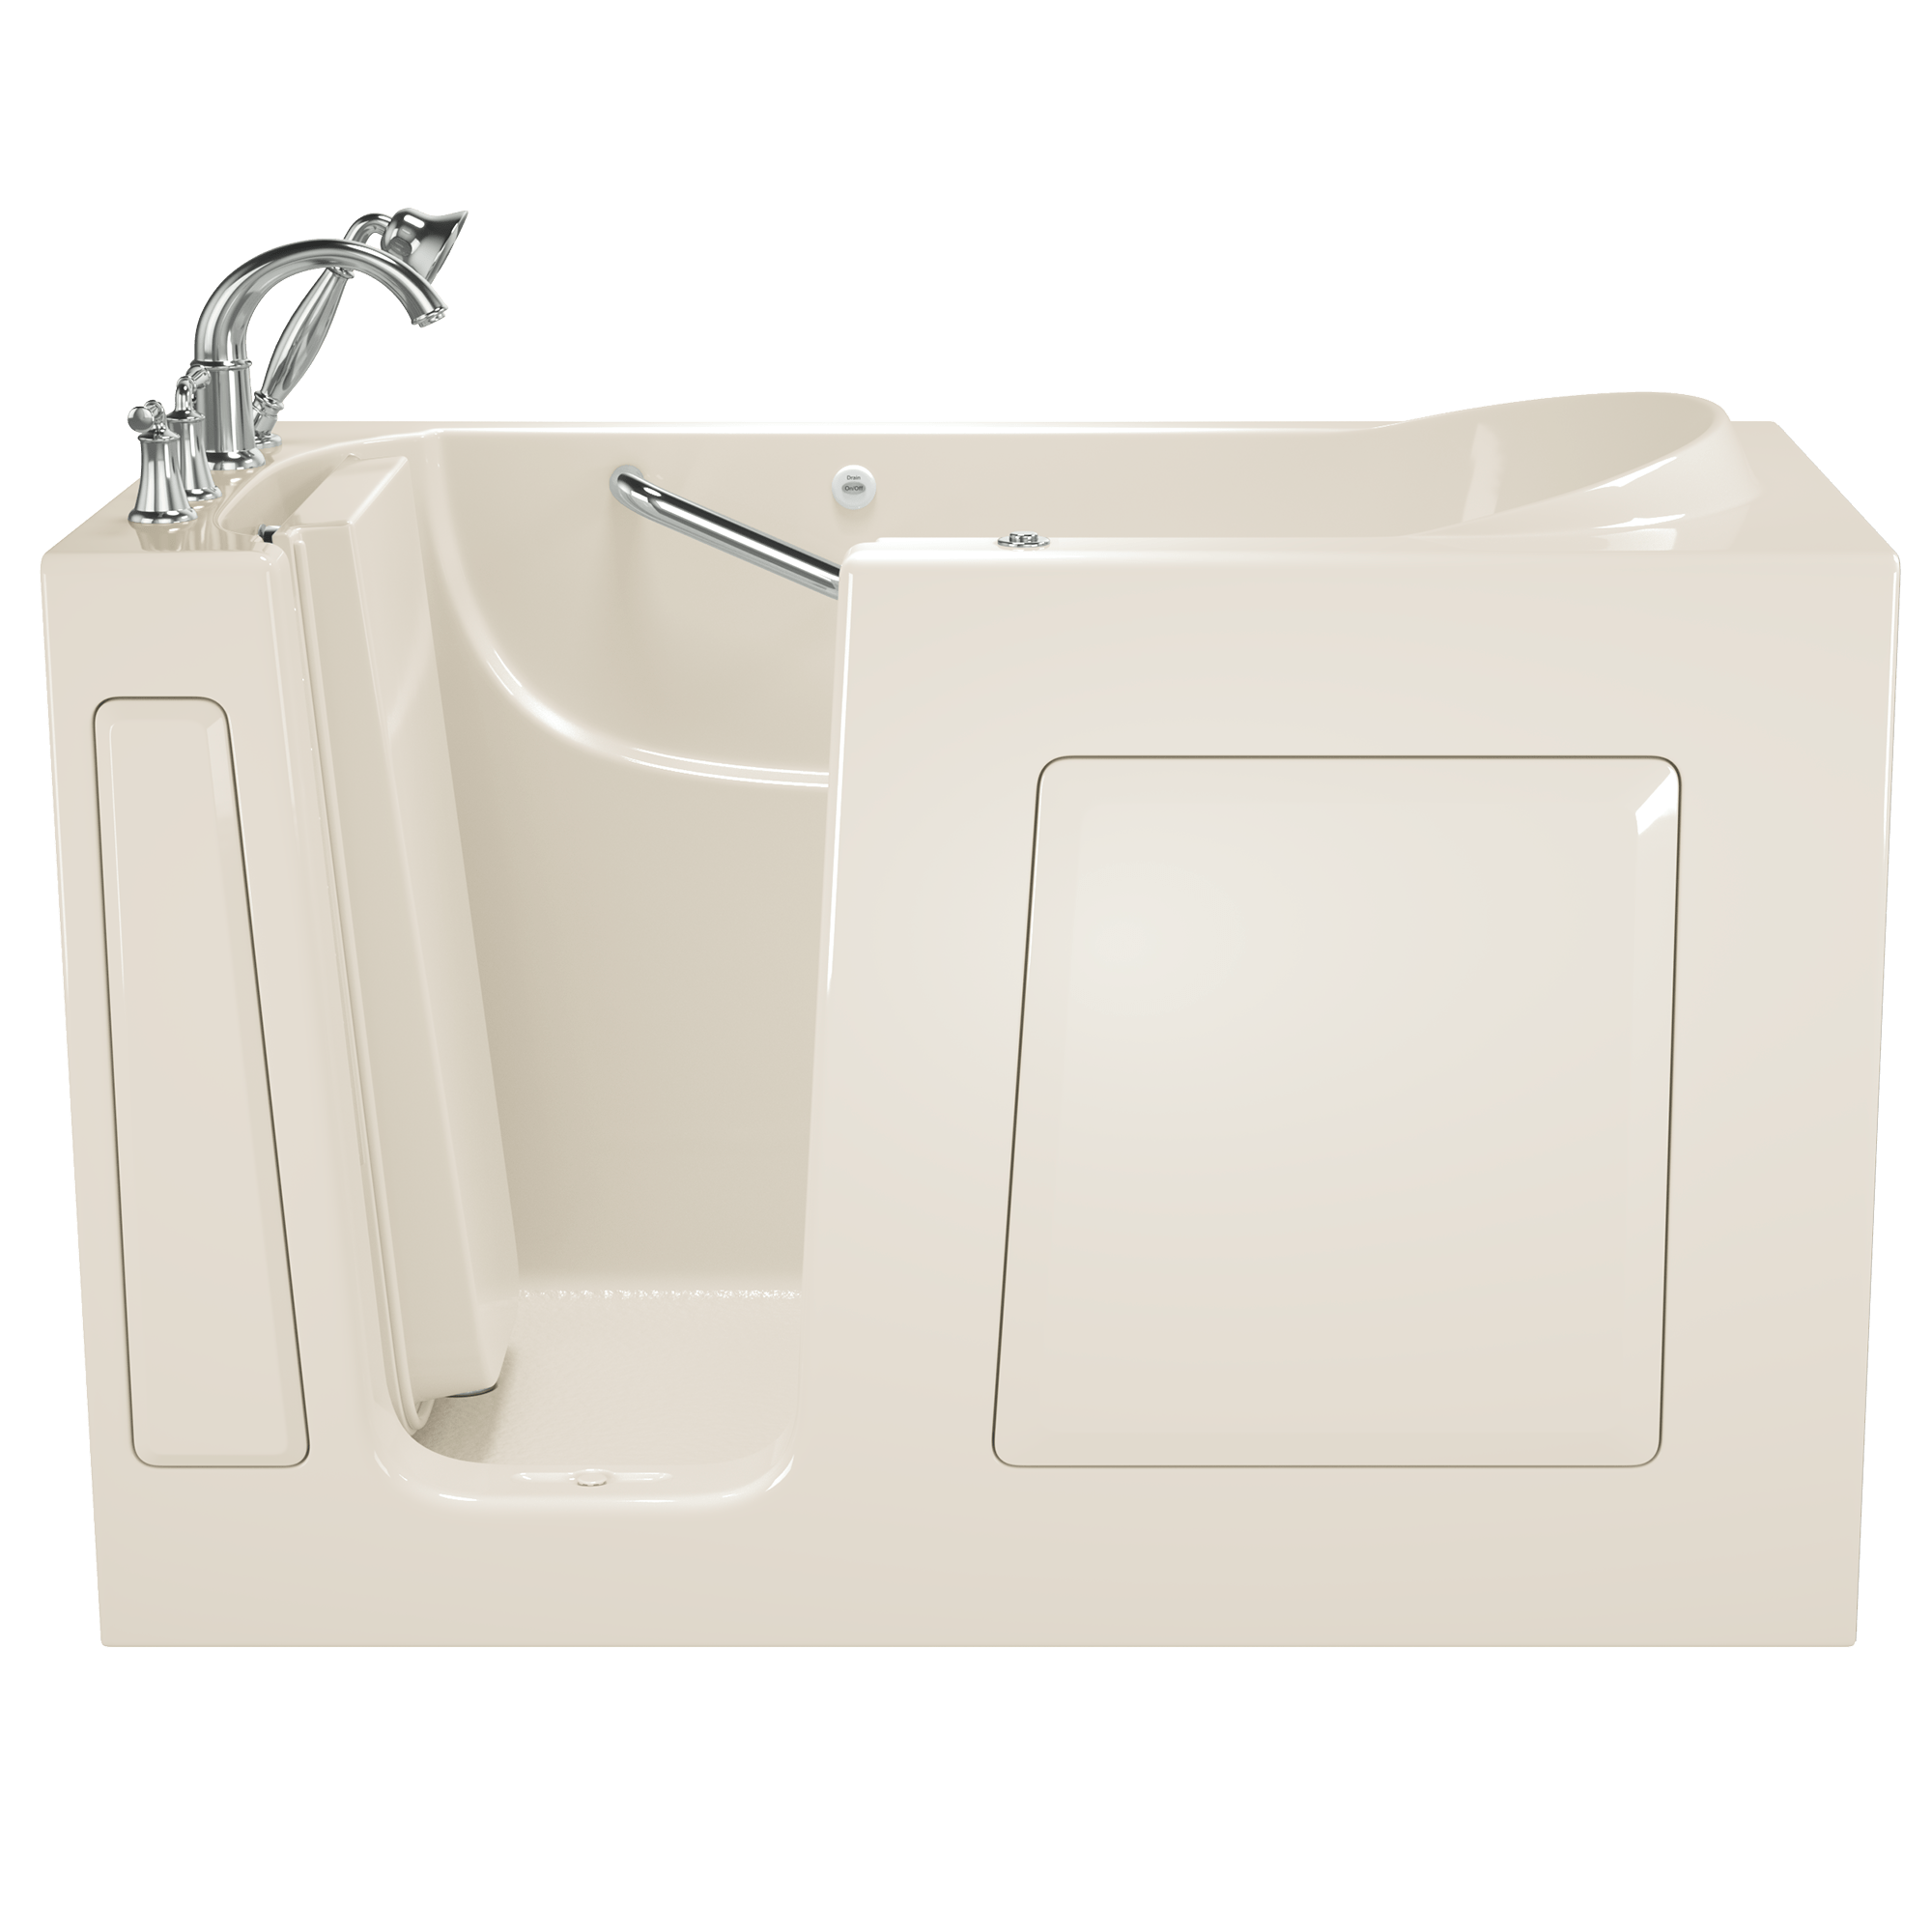 Gelcoat Value Series 60x30 Inch Walk In Bathtub with Whirlpool Massage System   Left Hand Door and Drain WIB LINEN